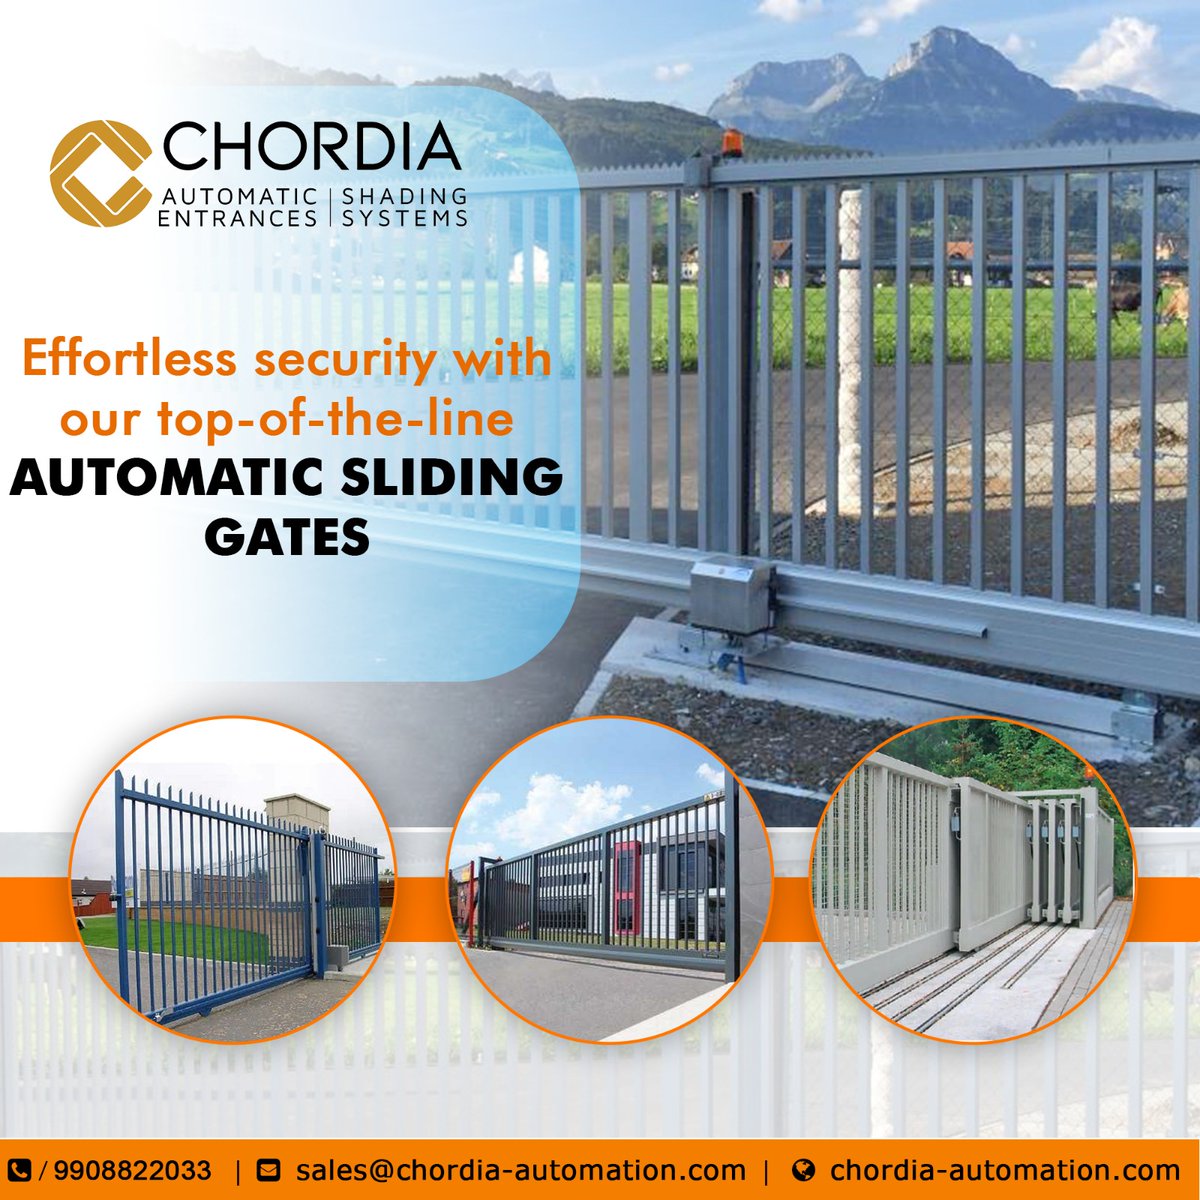 Experience the perfect combination of beauty and security with our high-quality Automated Sliding Gates.

For enquires visit @ chordia-automation.com 

#gateopeners #automation #automaticgates #slidinggateoperators #gate #swinggateoperators #swinggateopeners #chordiaautomation